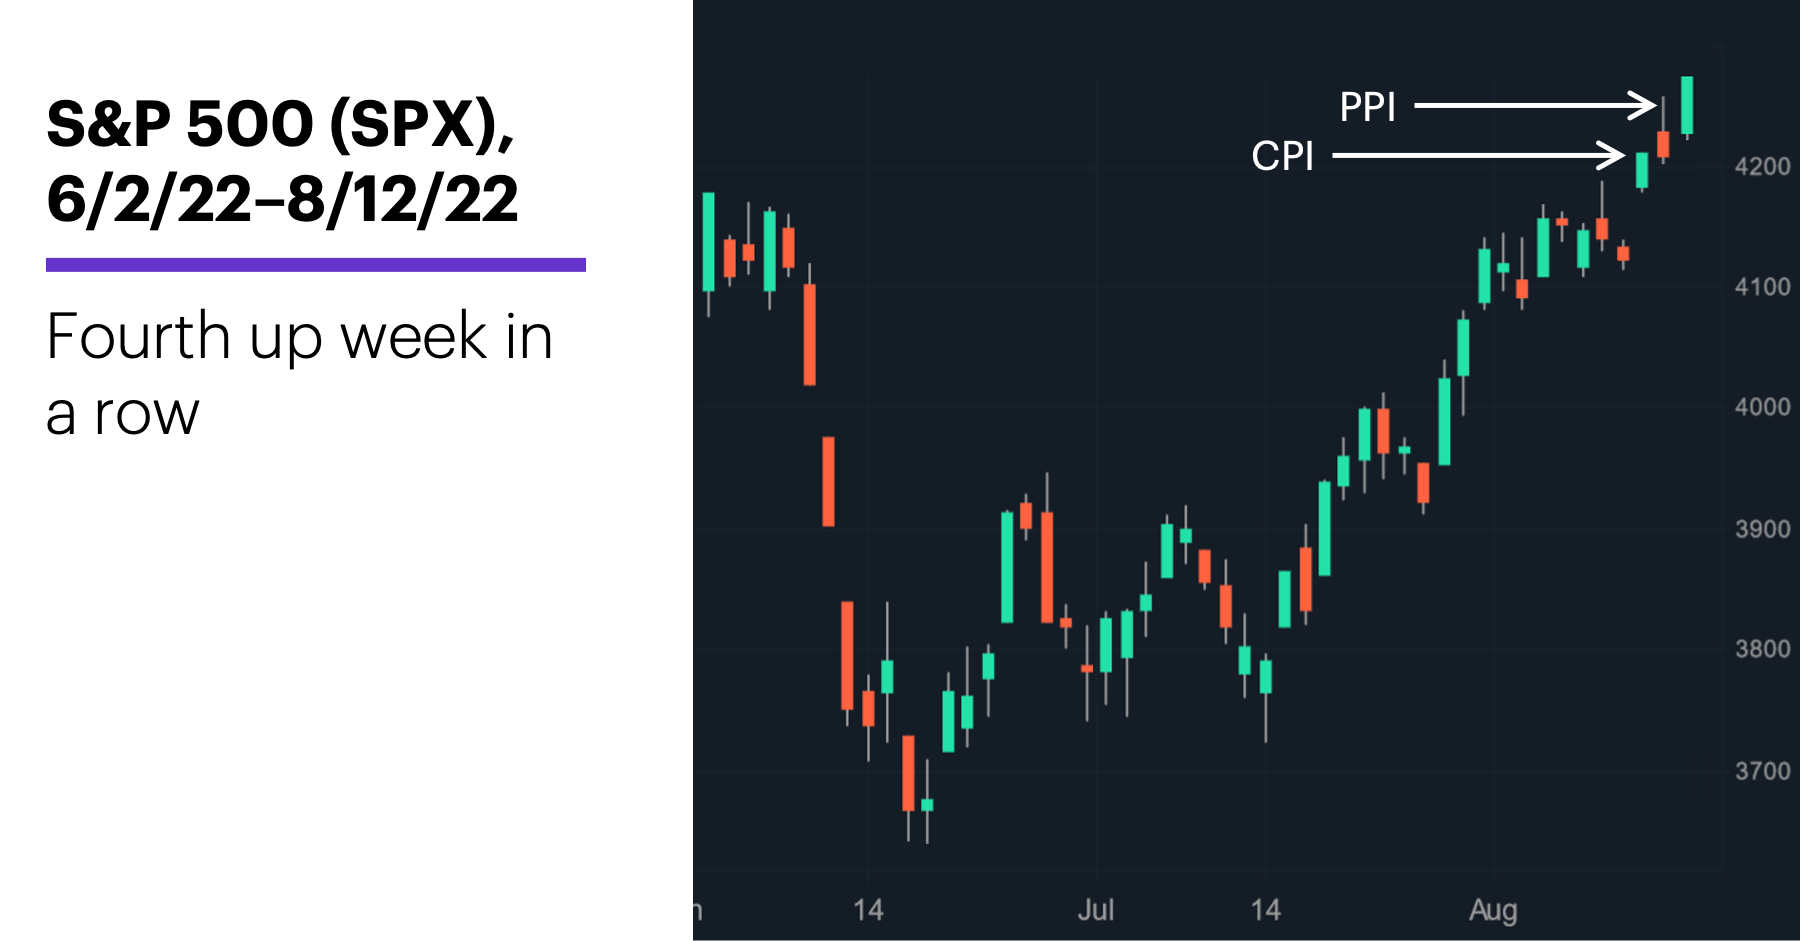 Chart 1: S&P 500 (SPX), 6/2/22–8/12/22. S&P 500 (SPX) price chart. Fourth up week in a row.